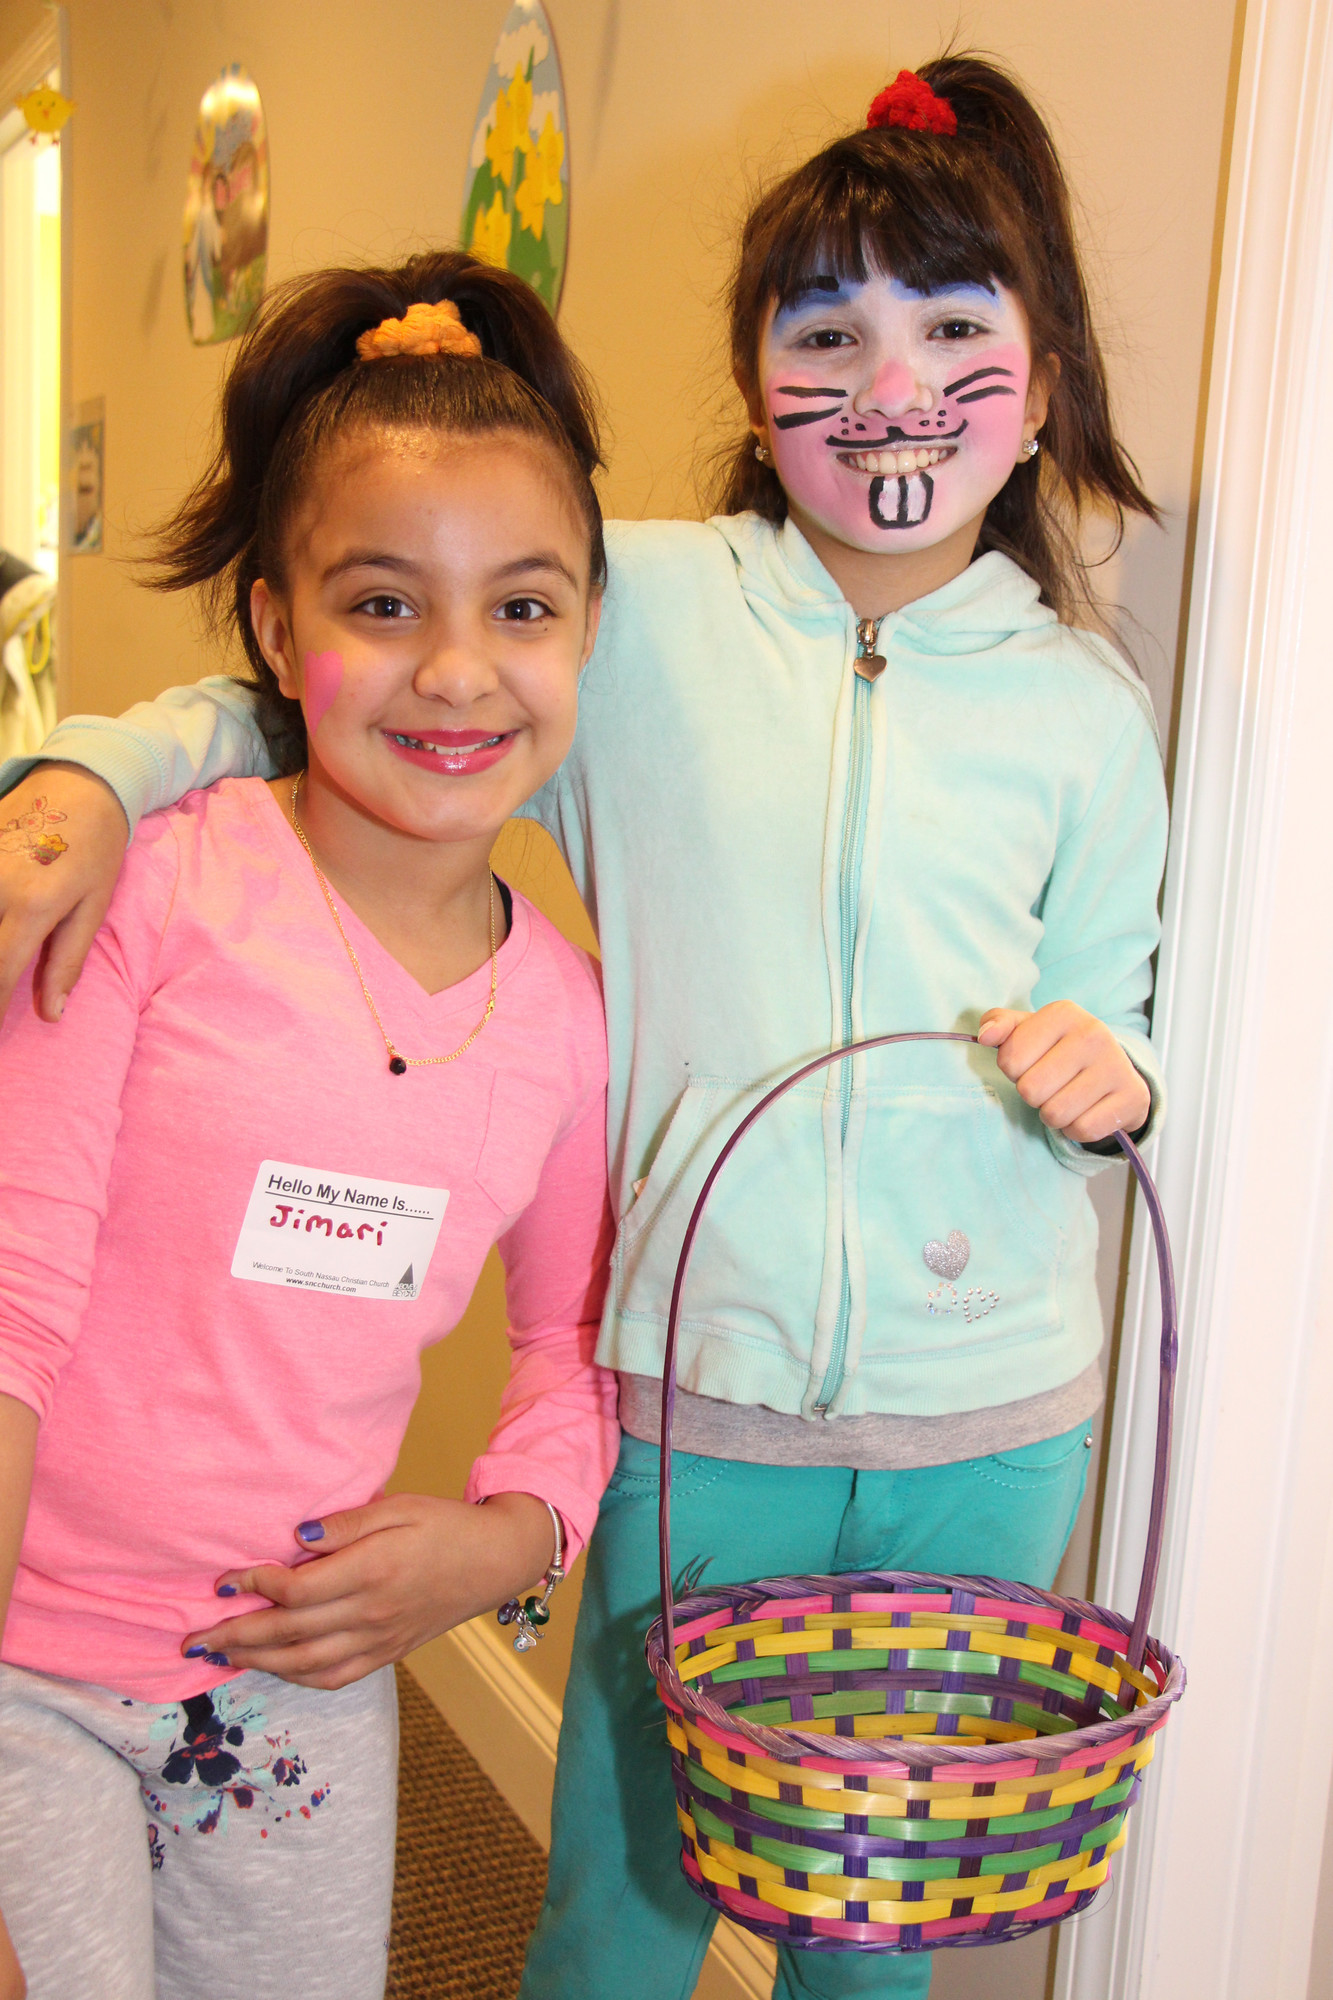 Jimari Velasquez, 10, left, and Ruby Maluik, 10, showed off their painted faces.